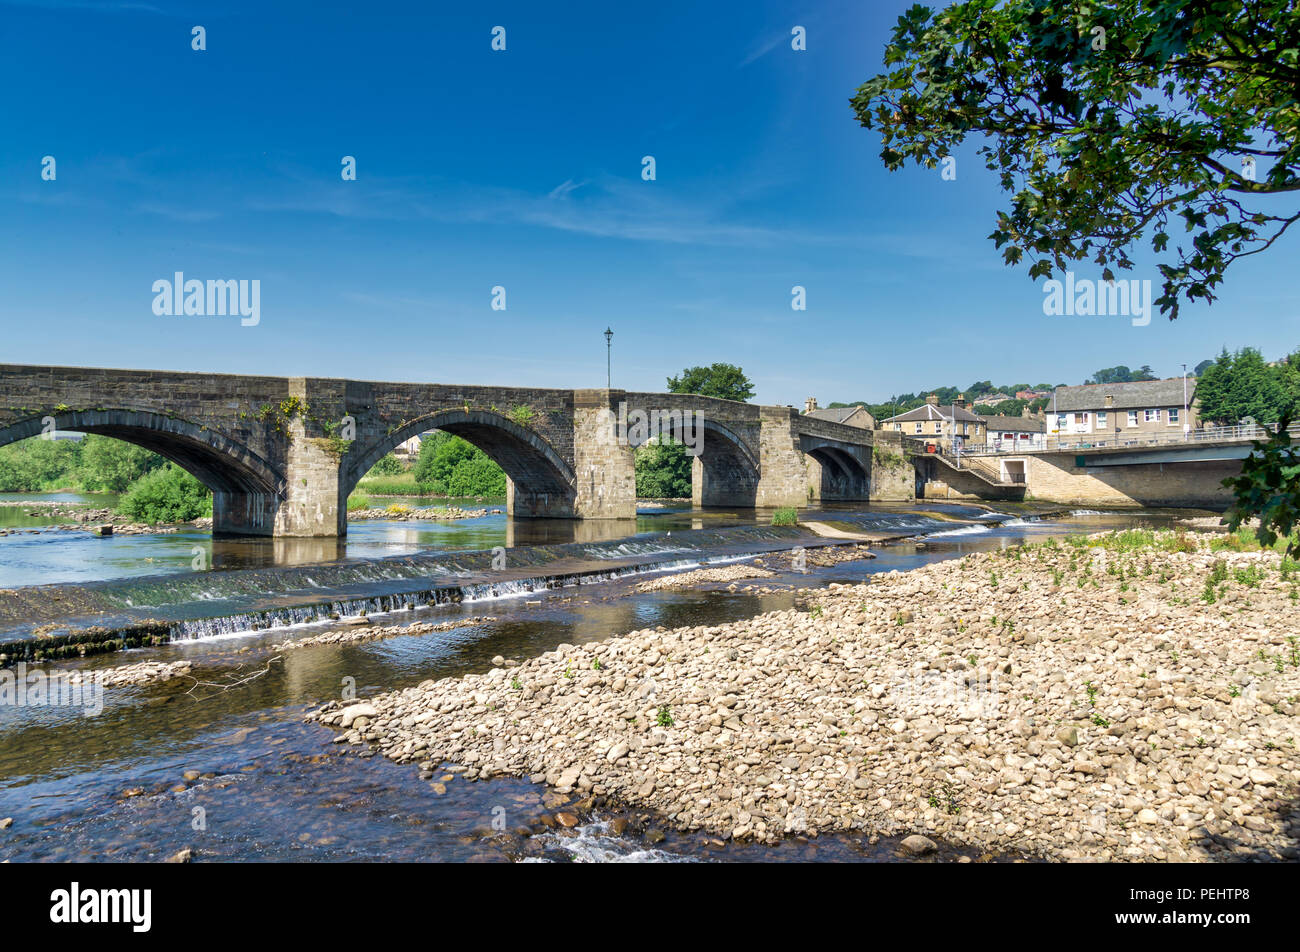 a view of Old Haydon bridge, a picturesque structure in Northumberland, England. Stock Photo